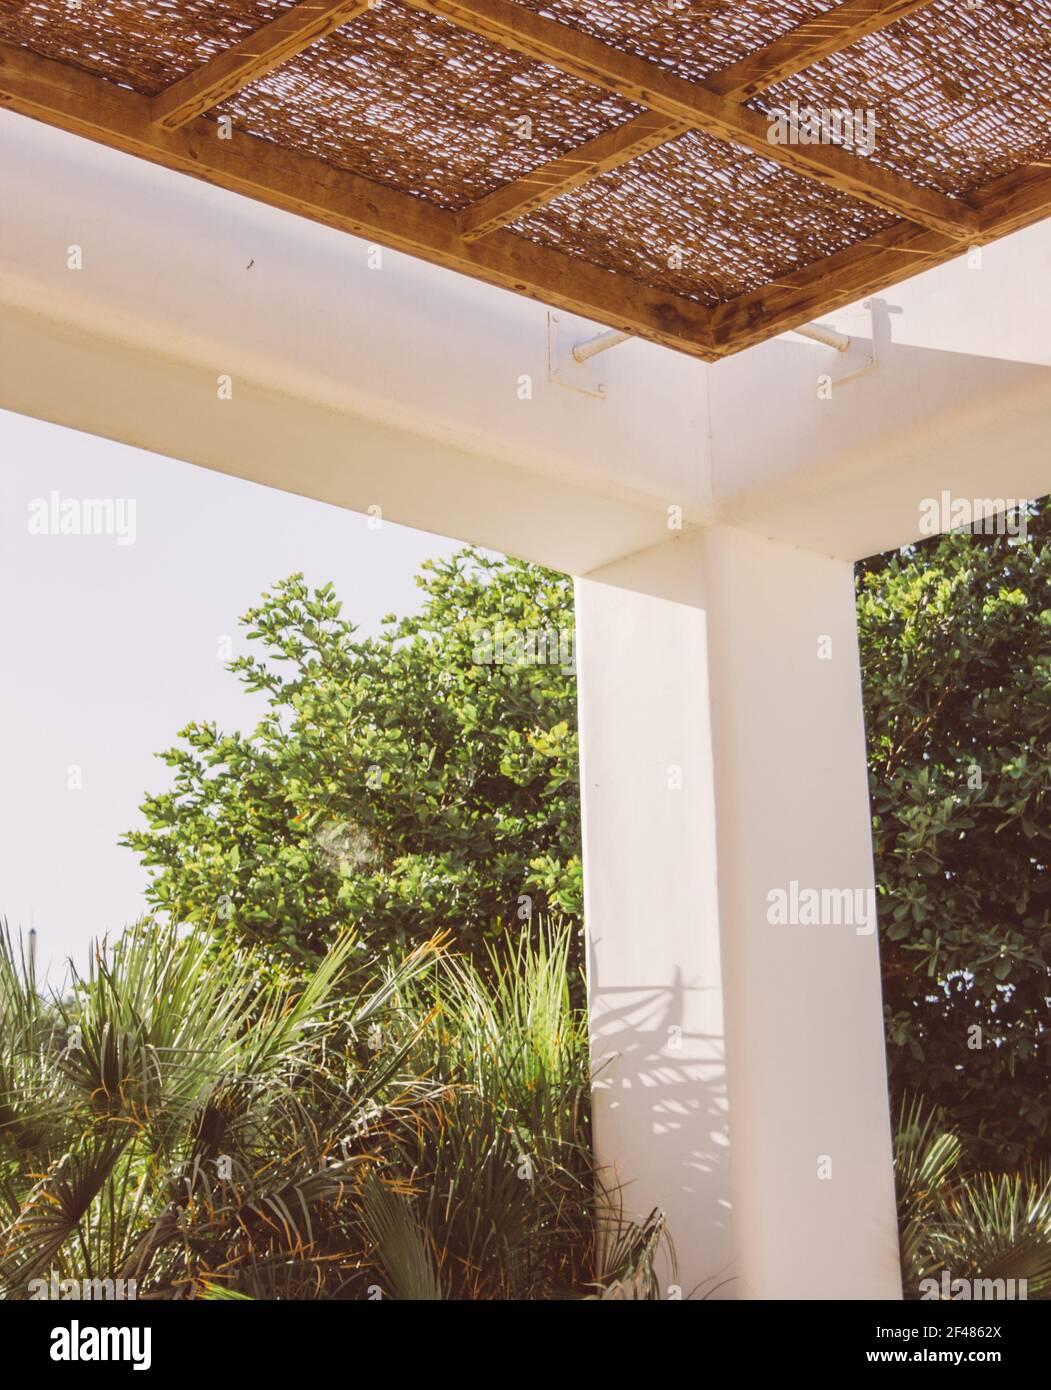 Relaxation canopy with a thatched roof for sun protection.Egypt in summer Stock Photo